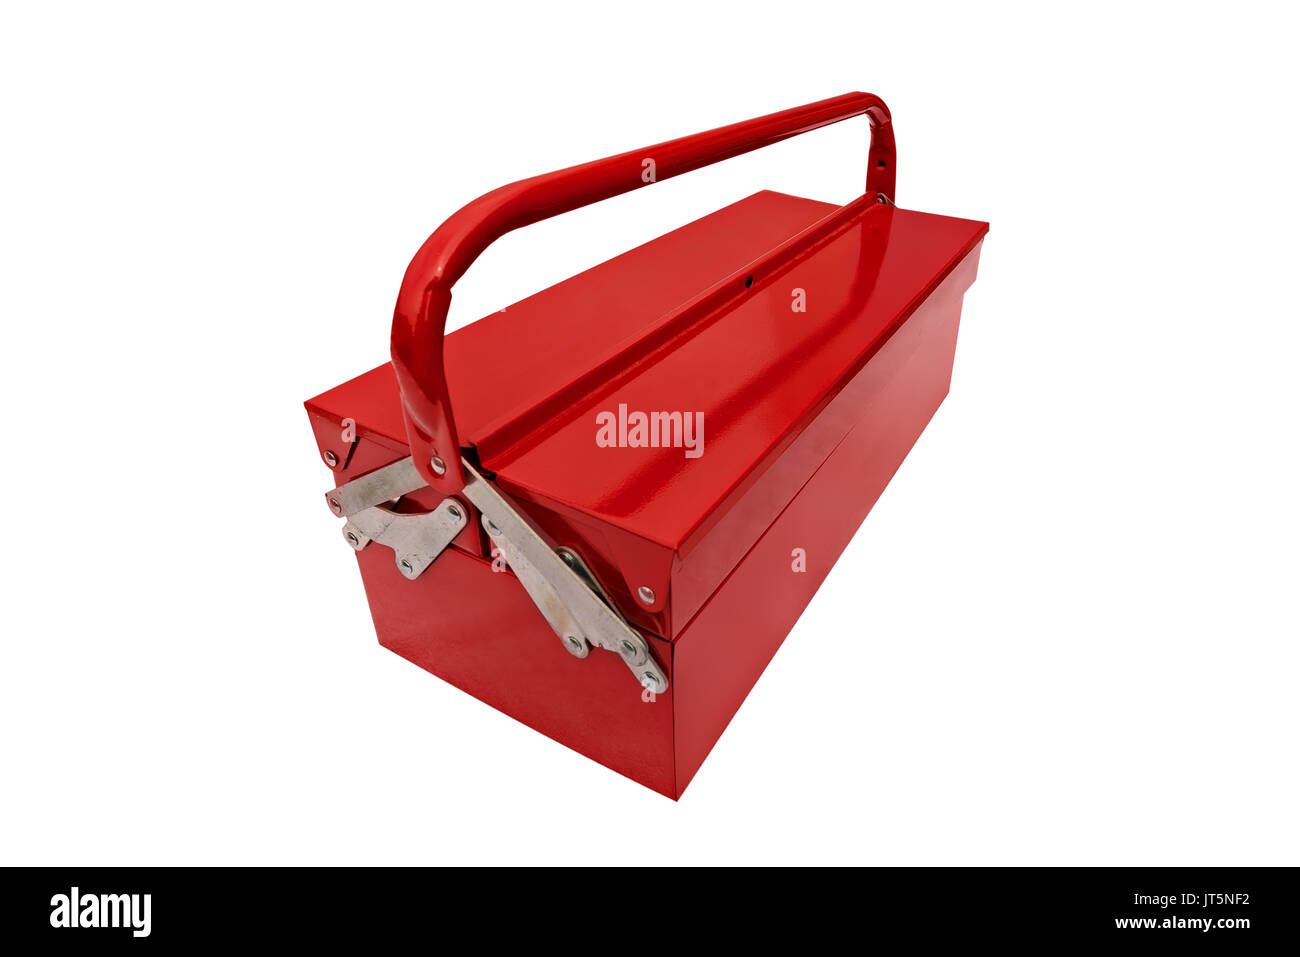 red metallic closed iconic toolbox on white background Stock Photo